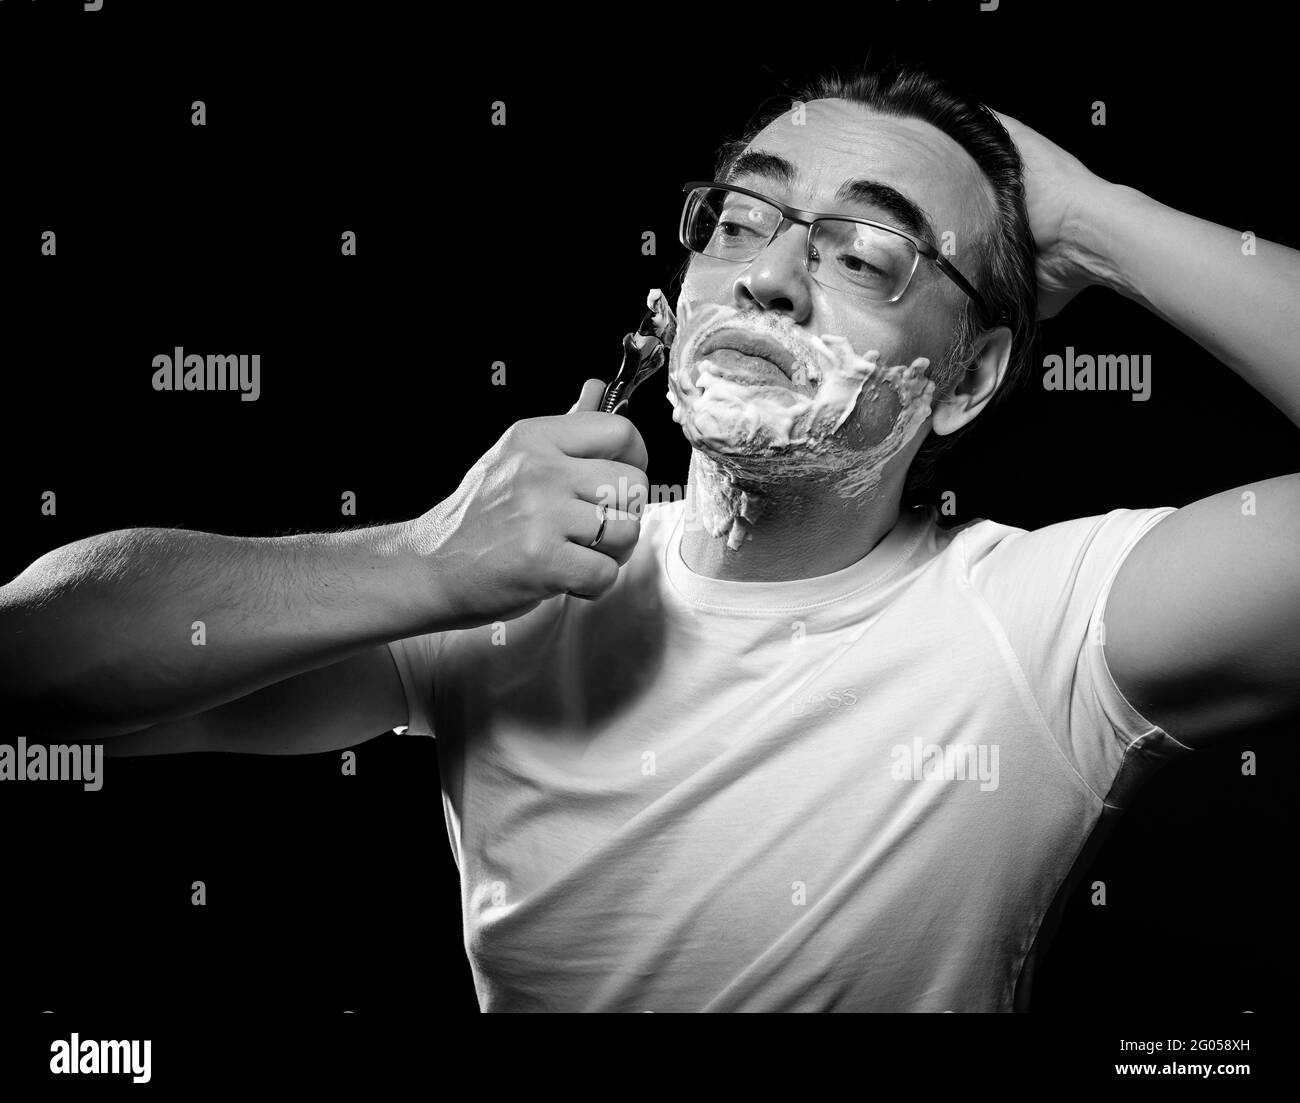 https://c8.alamy.com/comp/2G058XH/black-and-white-portrait-of-man-in-white-t-shirt-and-glasses-shaving-with-razor-blades-and-gel-foam-and-looking-aside-2G058XH.jpg